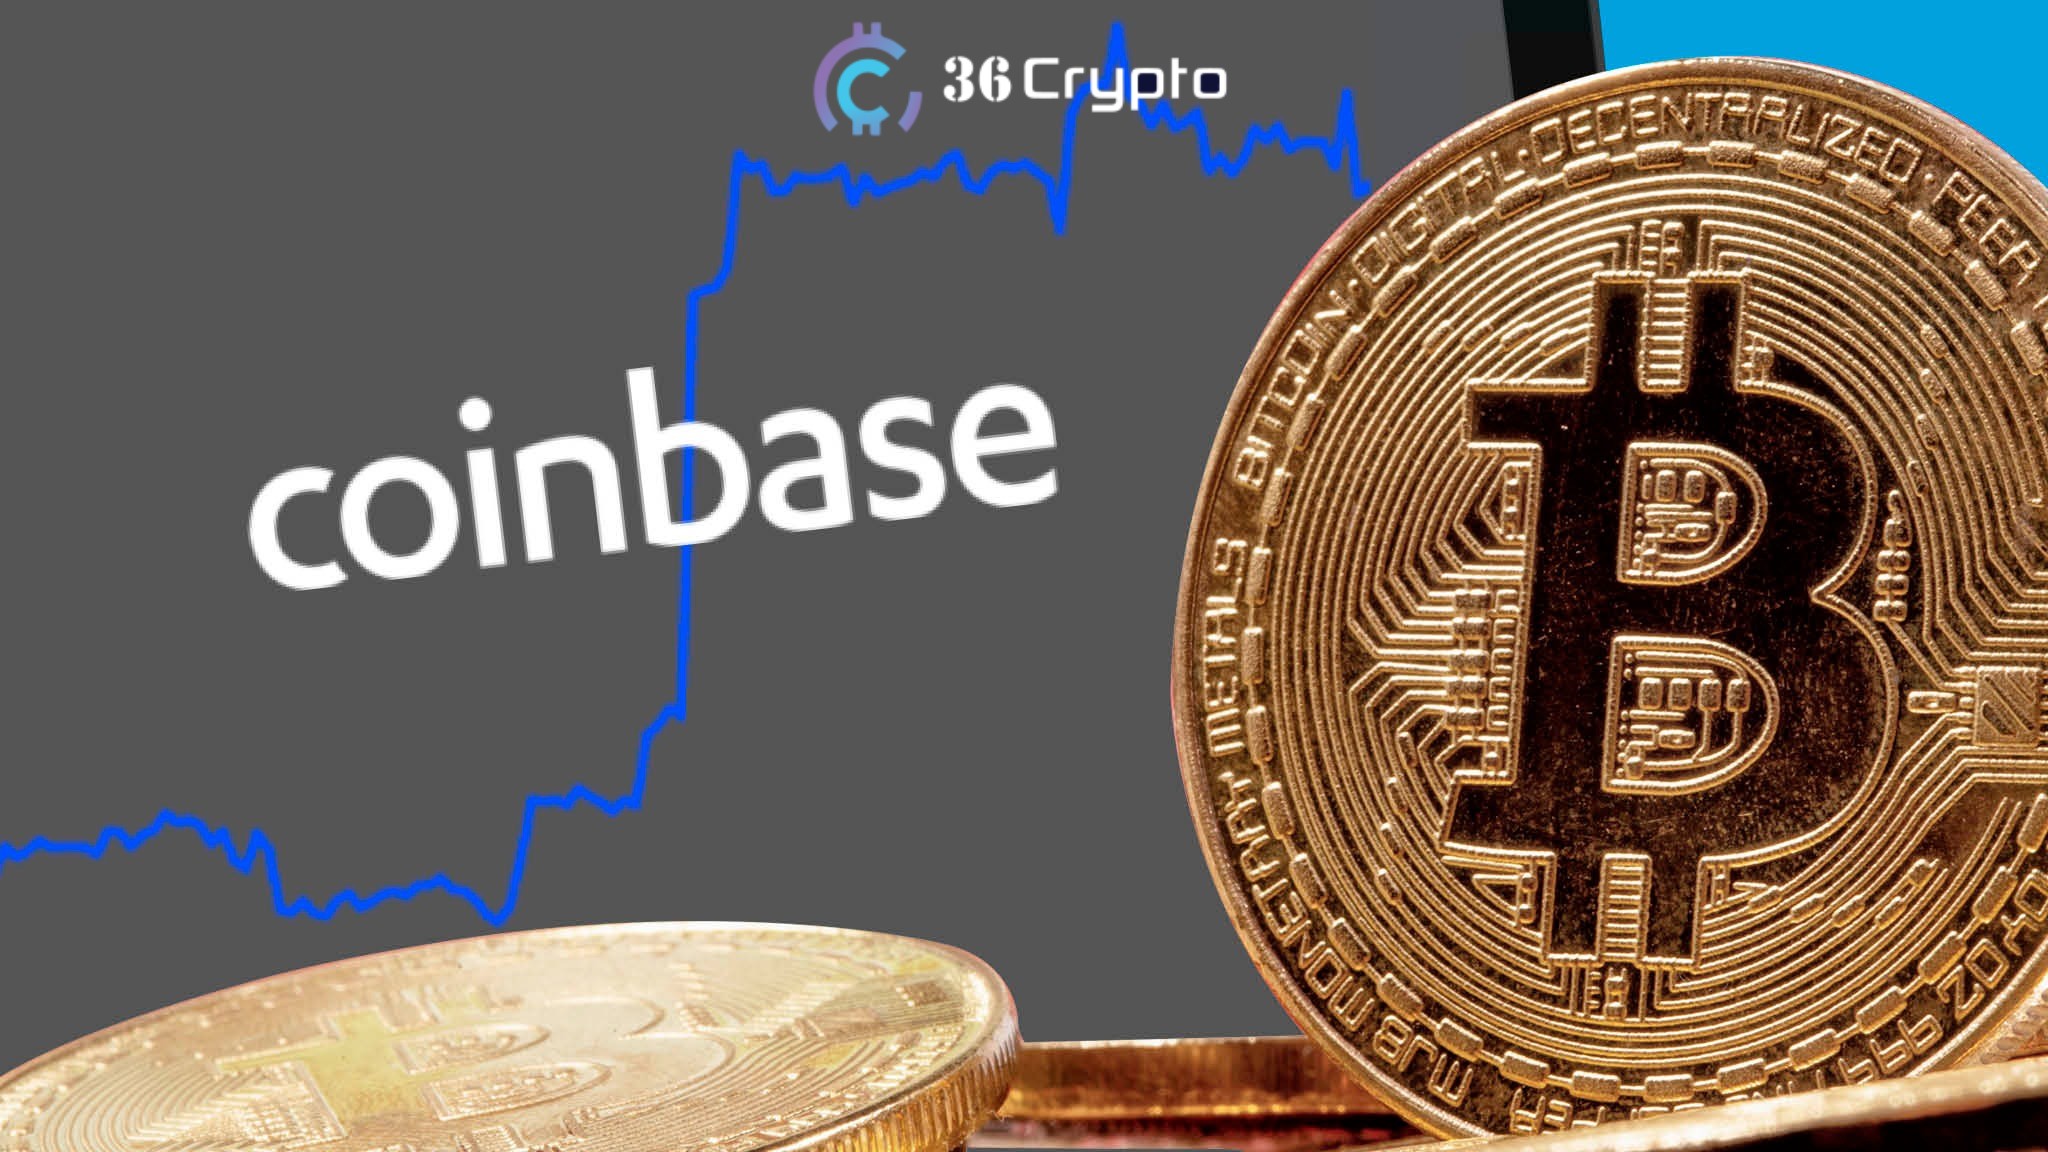 Tutorial: How To Buy Bitcoin on Coinbase (step-by-step Guide)